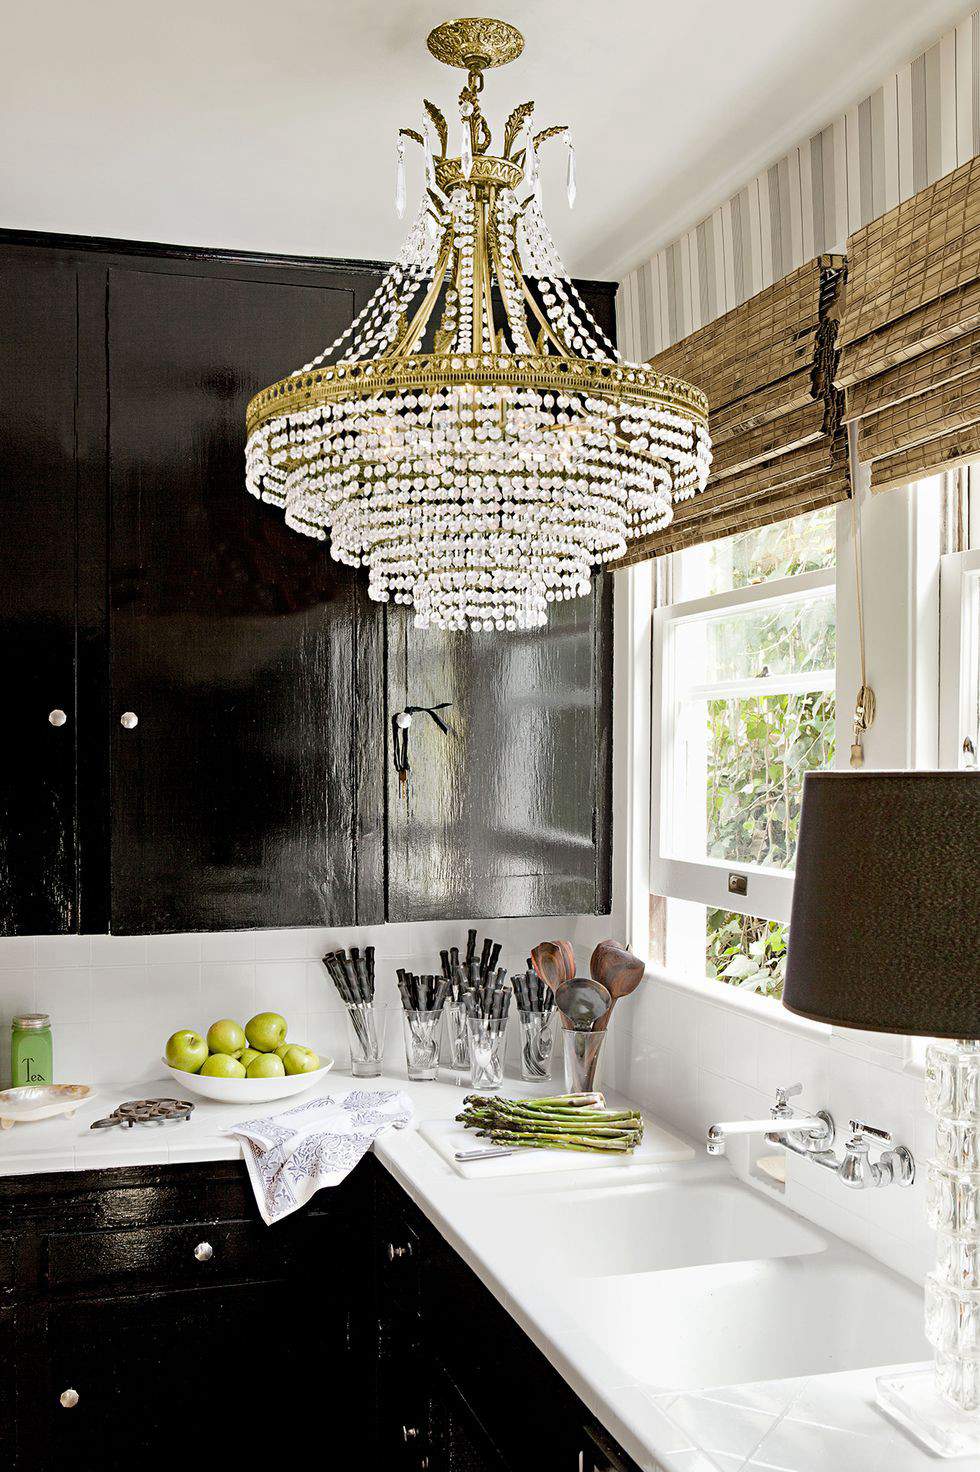 Black And White Kitchen Decor With Chandelier